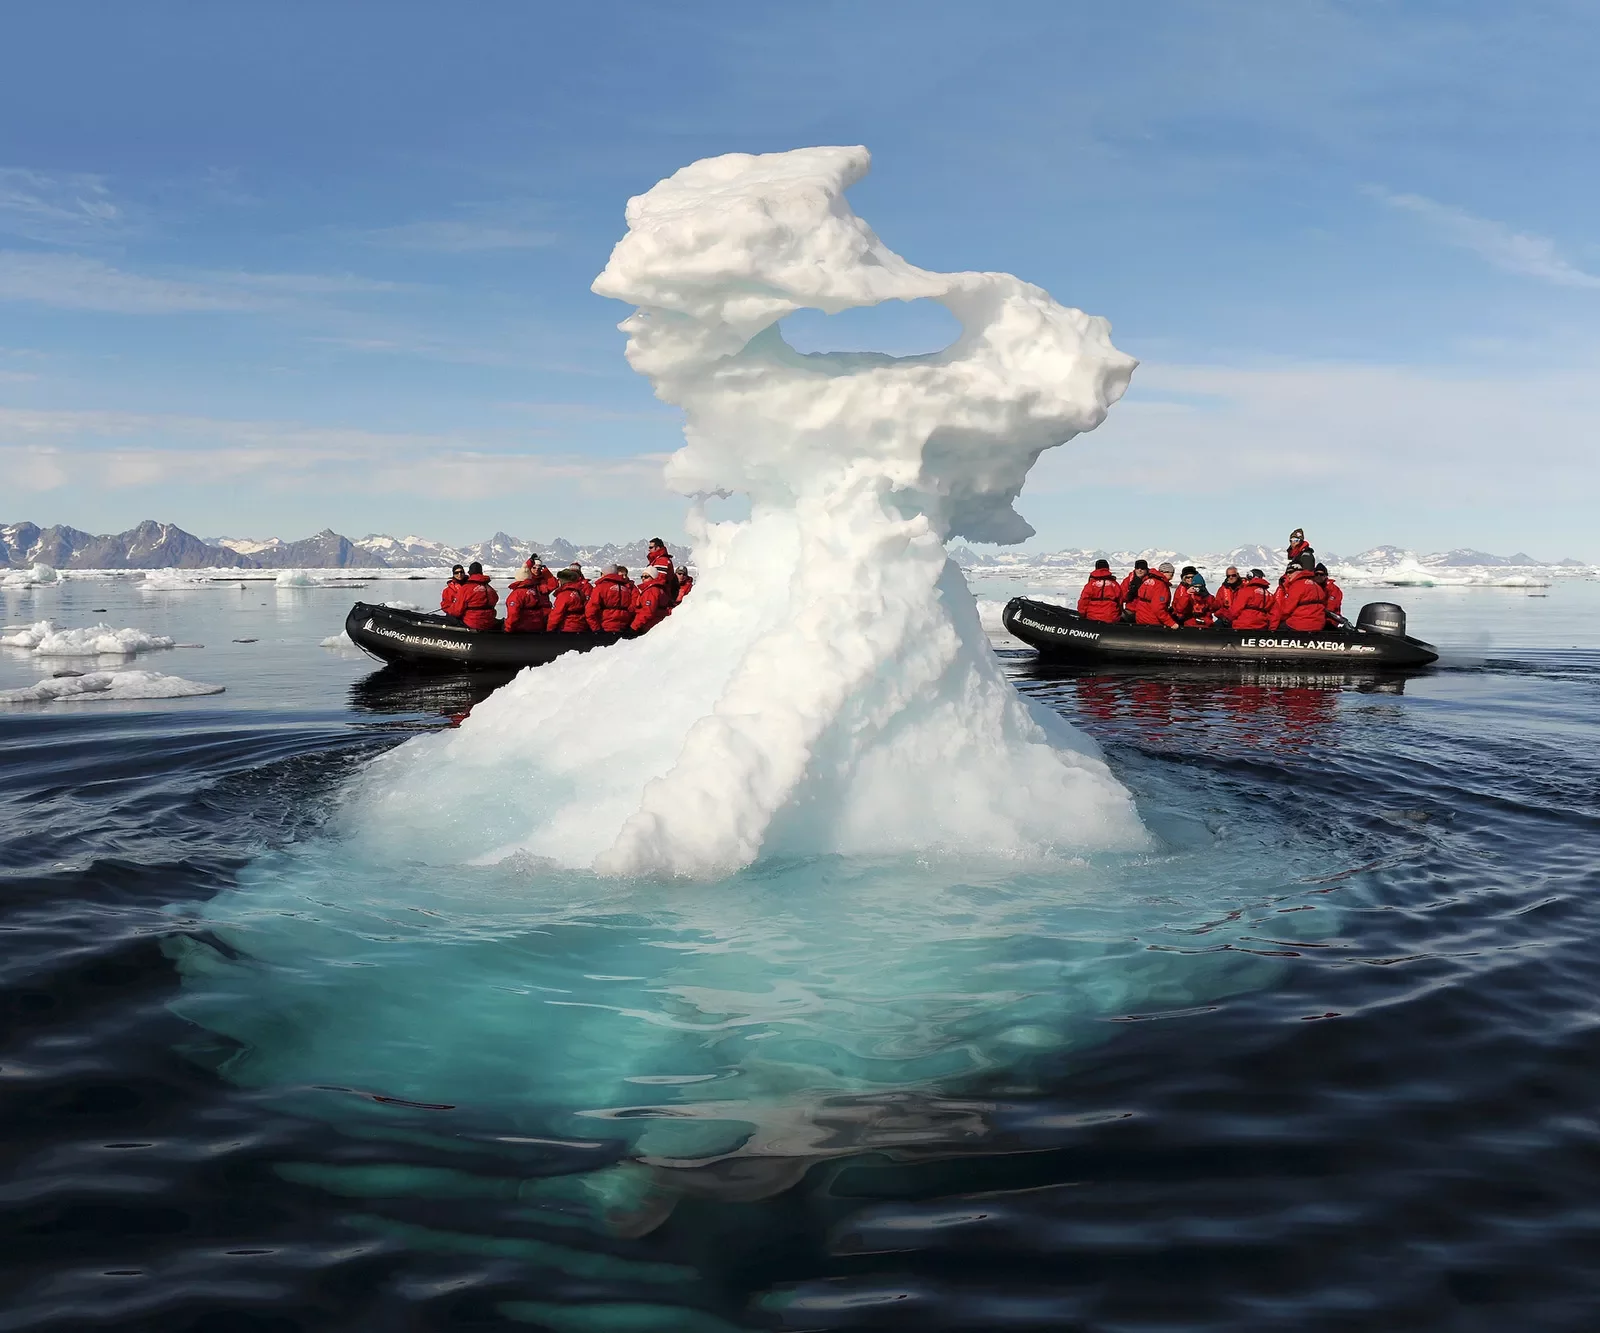 Riding in a zodiac boat past a large iceberg